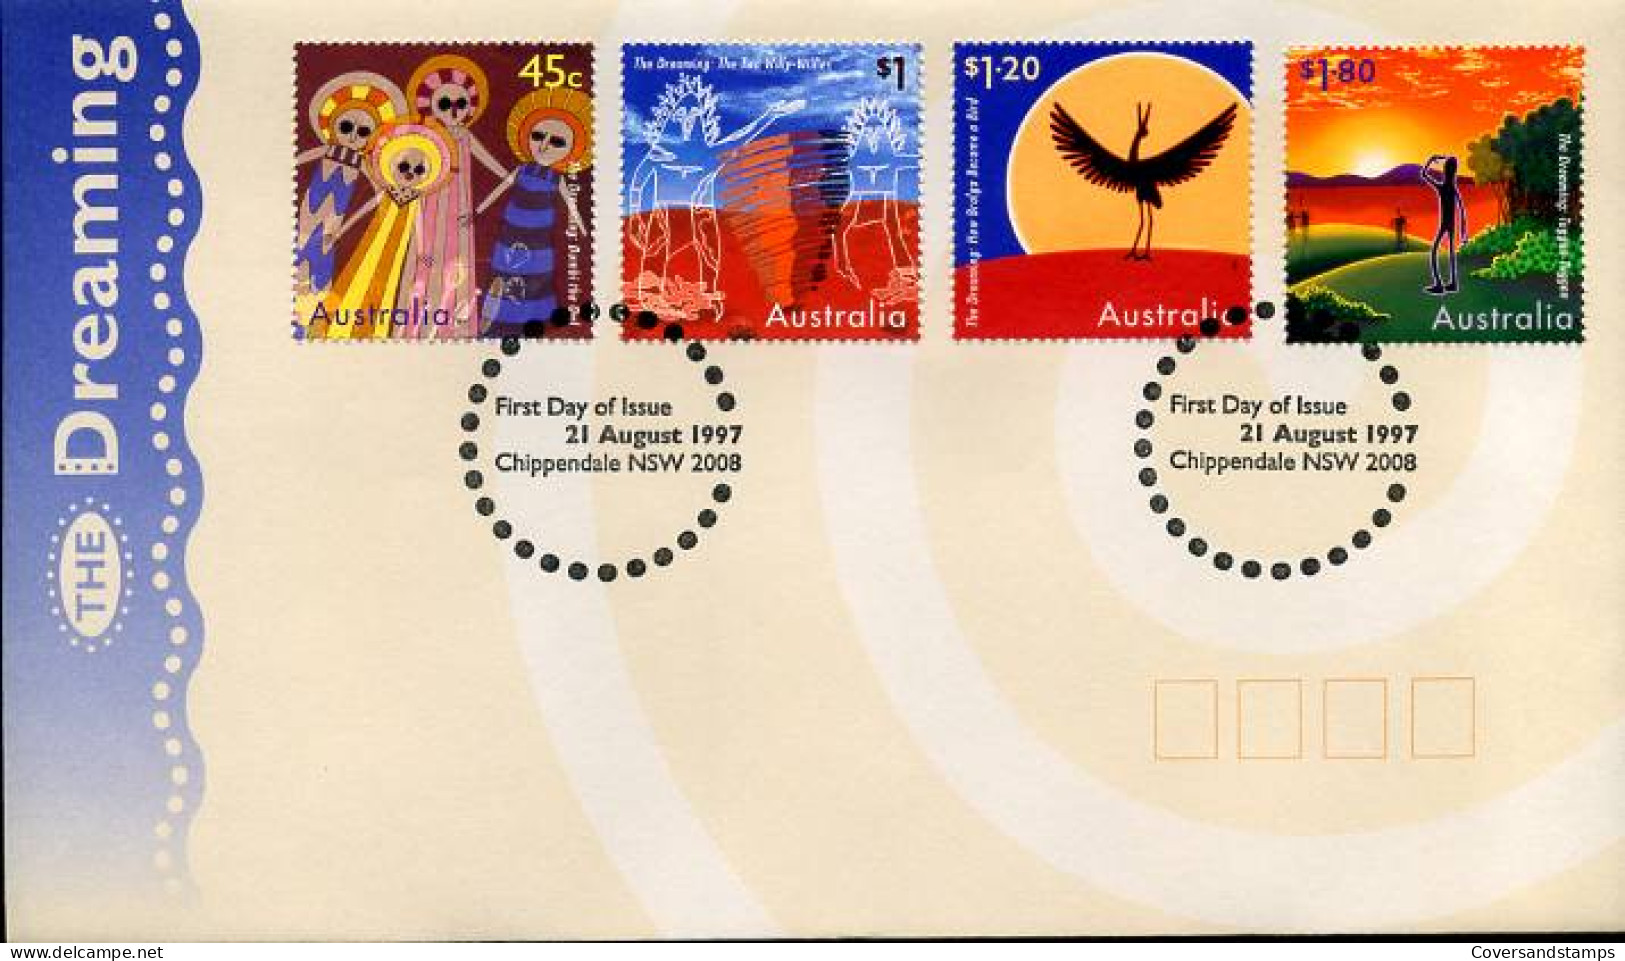 Australië  - FDC -  The Dreaming                                   - Premiers Jours (FDC)